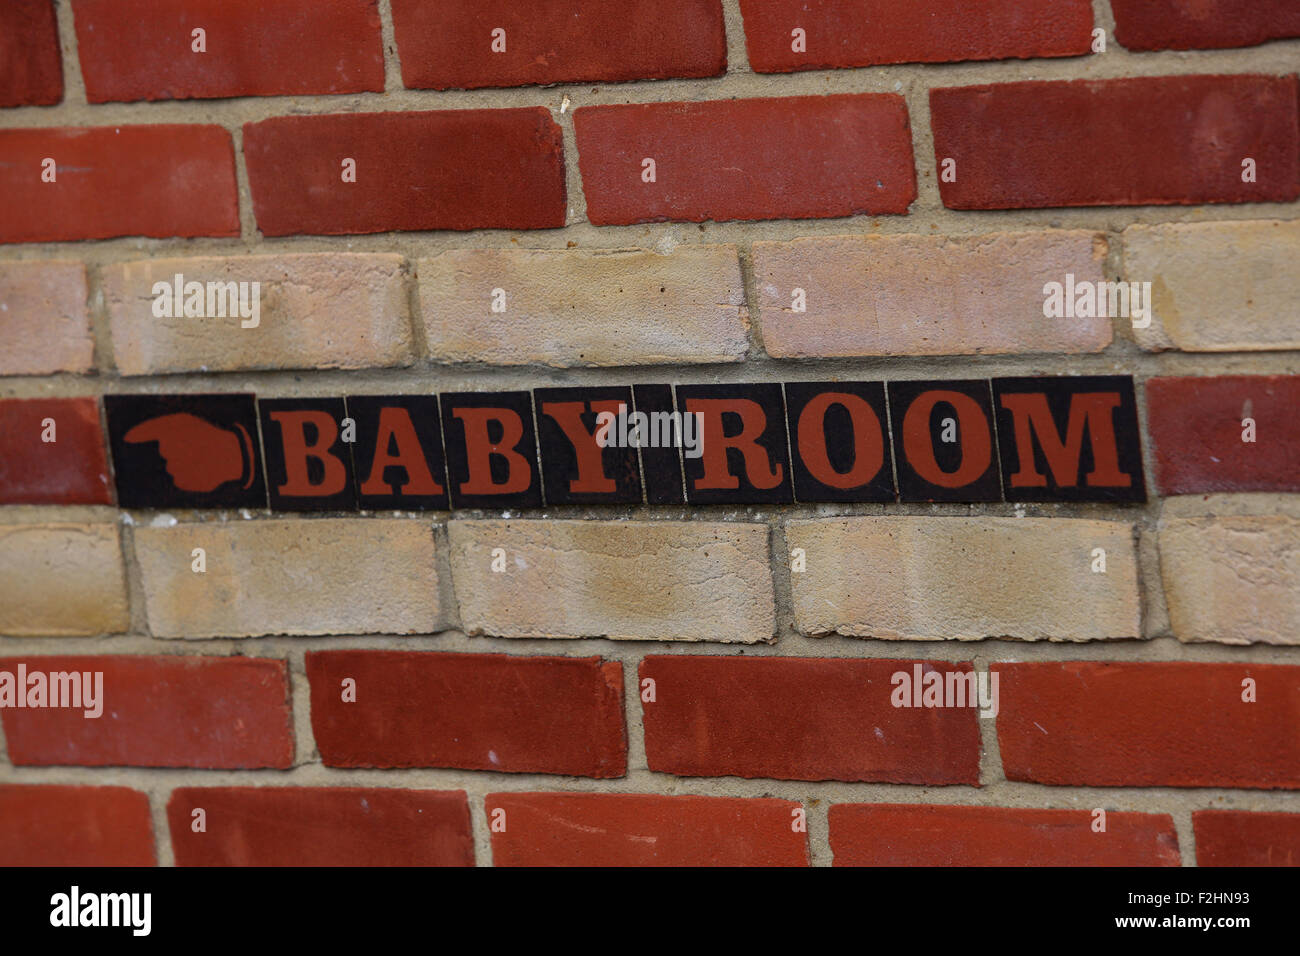 Baby Room sign outside a public toilet block in Beaulieu in the New Forest, Hampshire, UK. Stock Photo